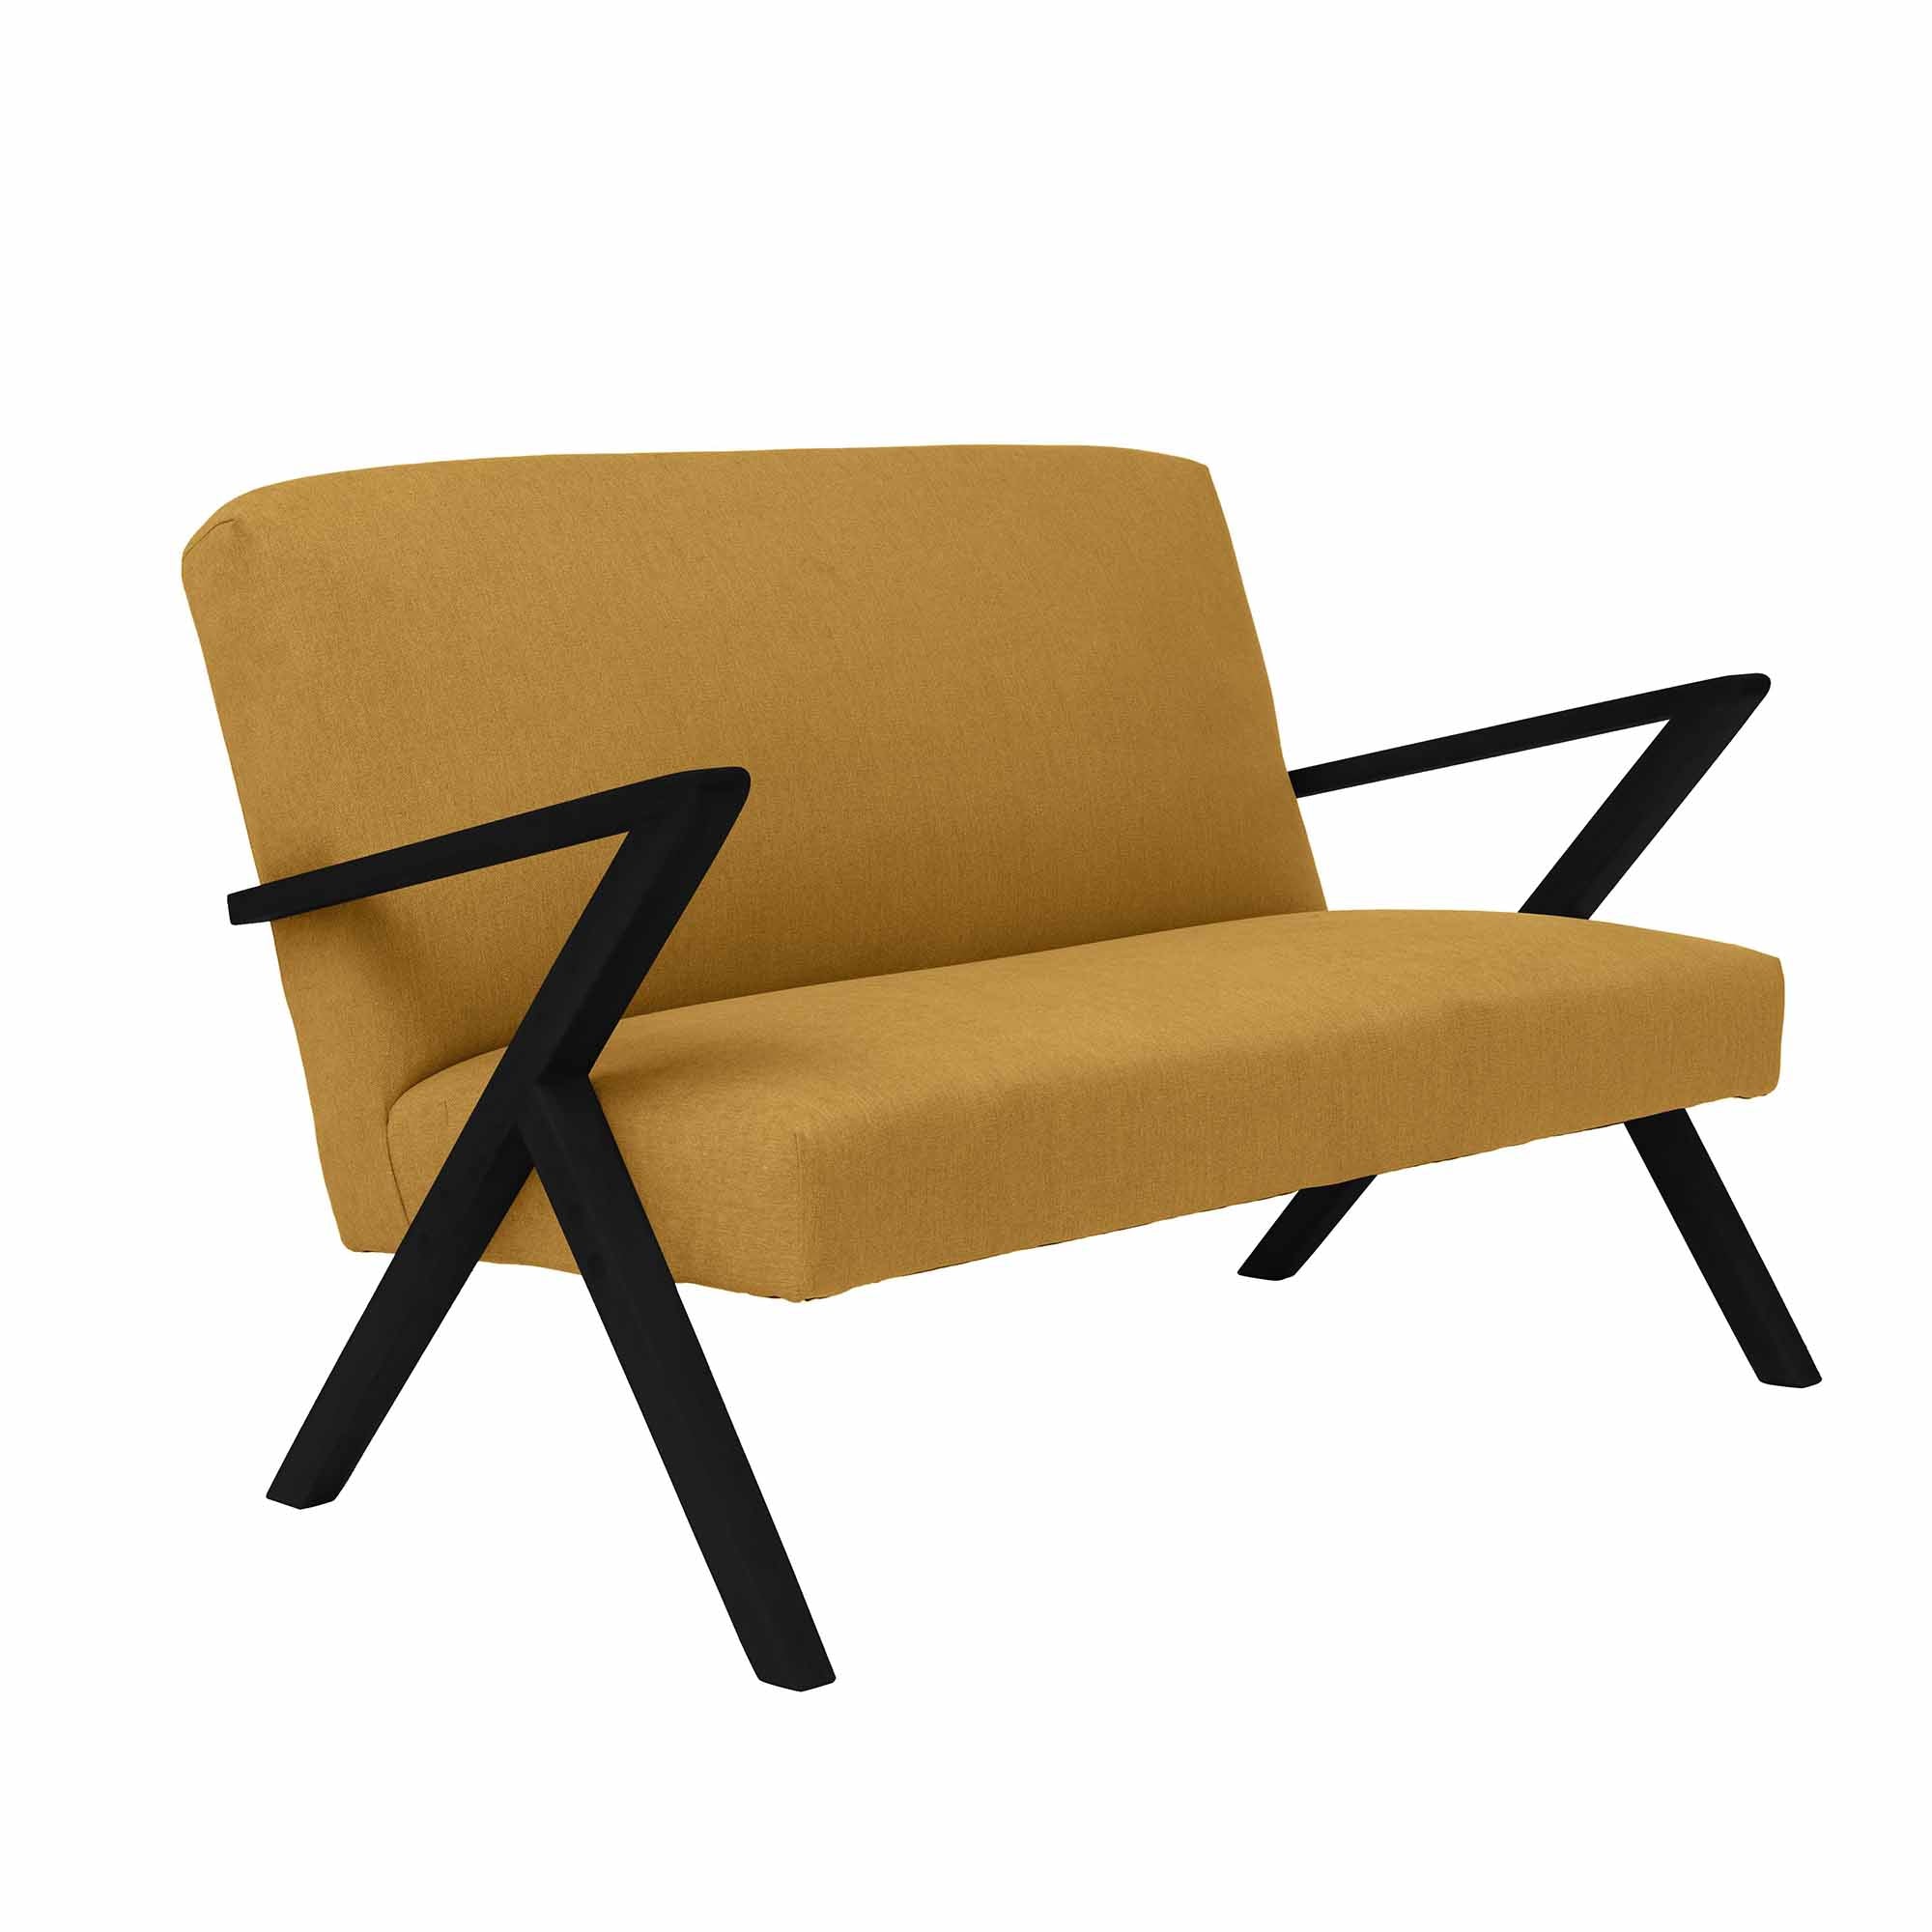 2-Seater Sofa, Beech Wood Frame, Black Lacquered yellow fabric, half-side view